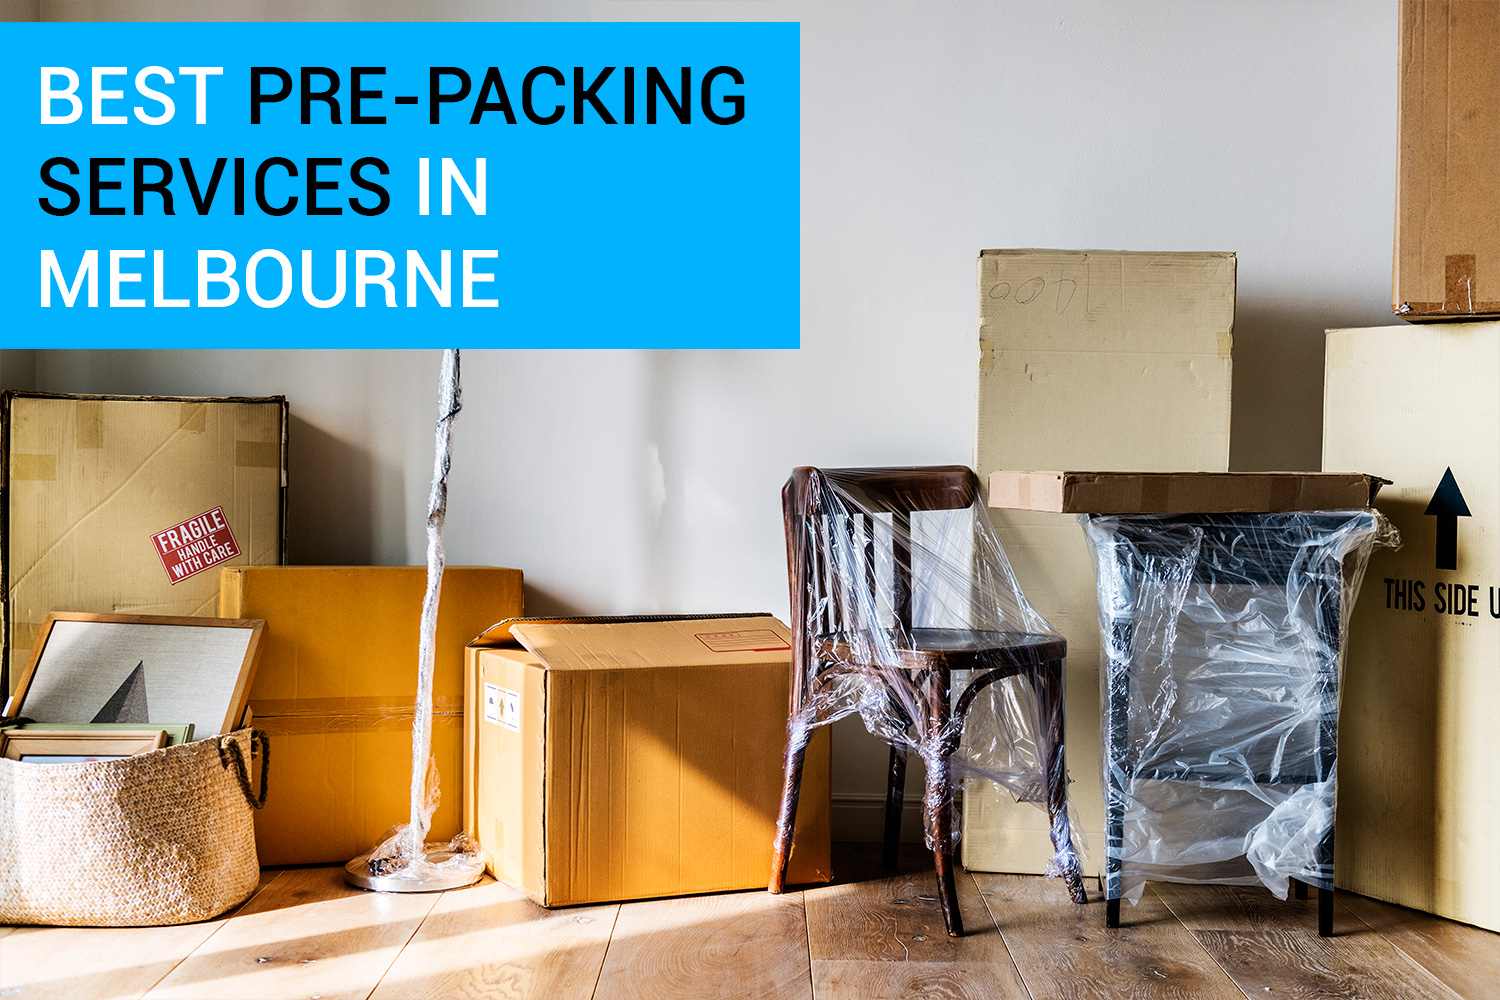 Streamlined Solutions From the Best Pre-Packing Services in Melbourne